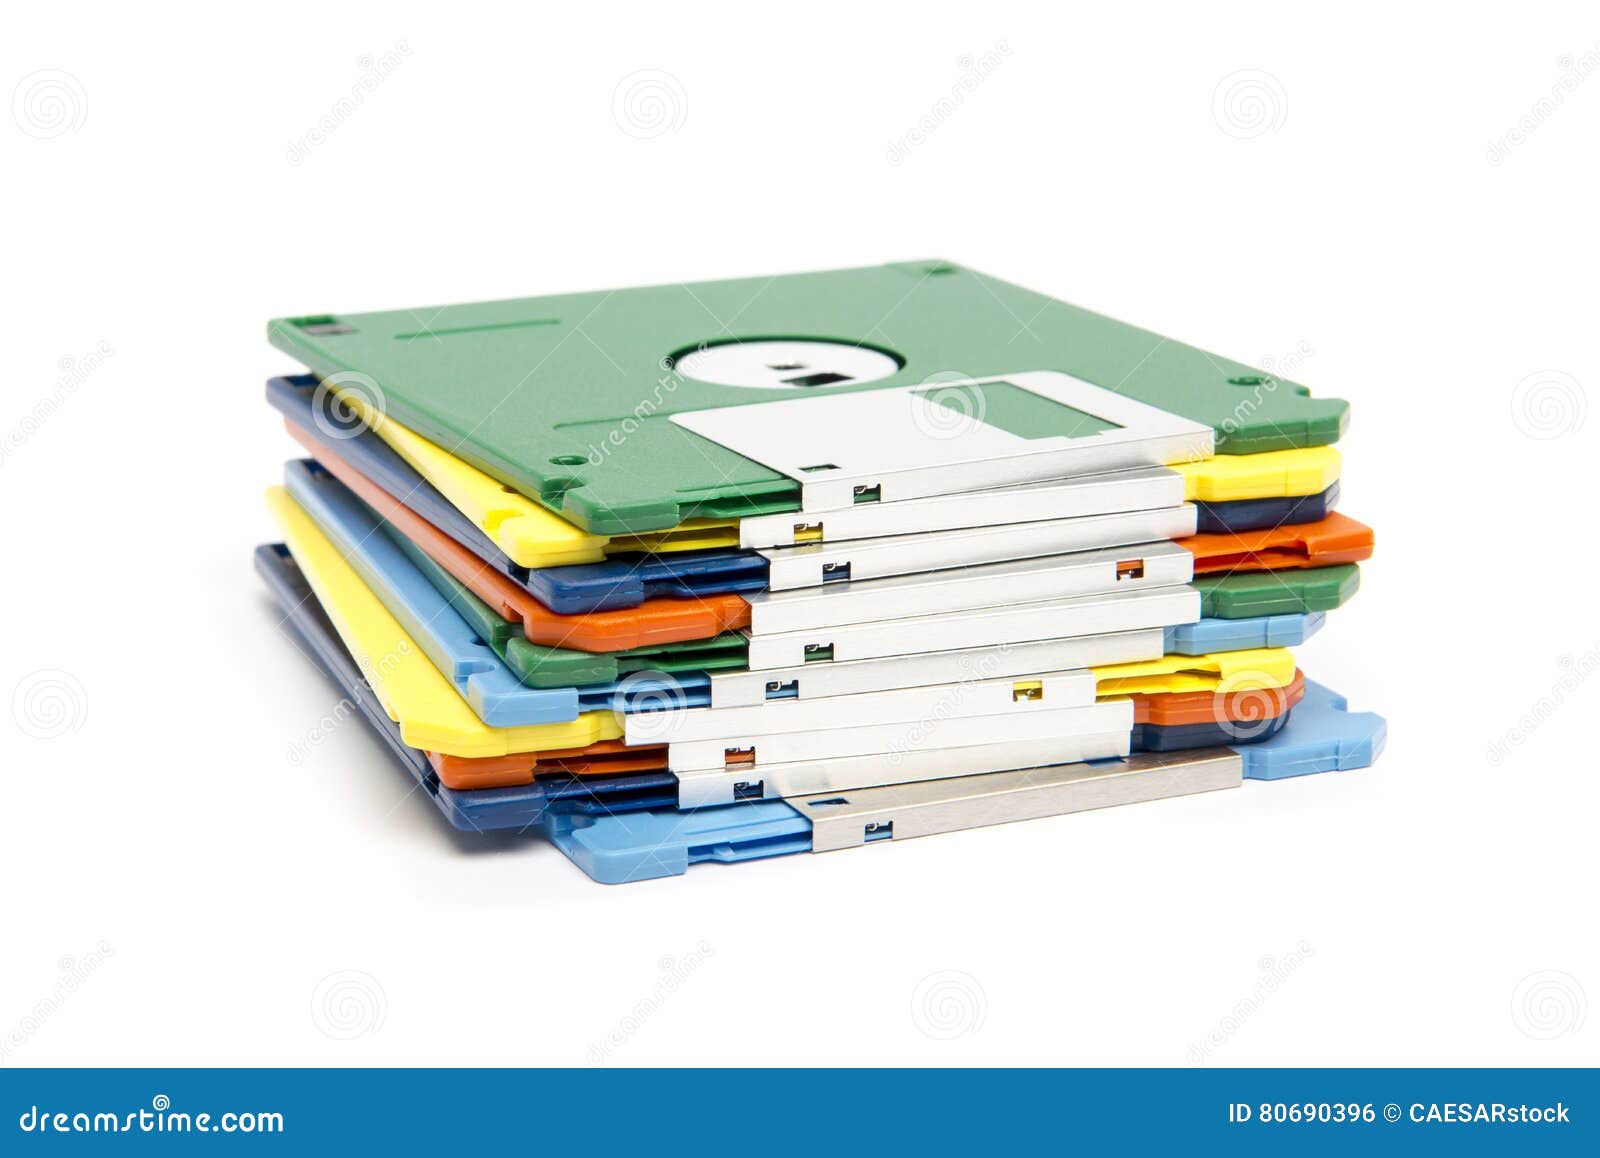 stack of colored floppy disks